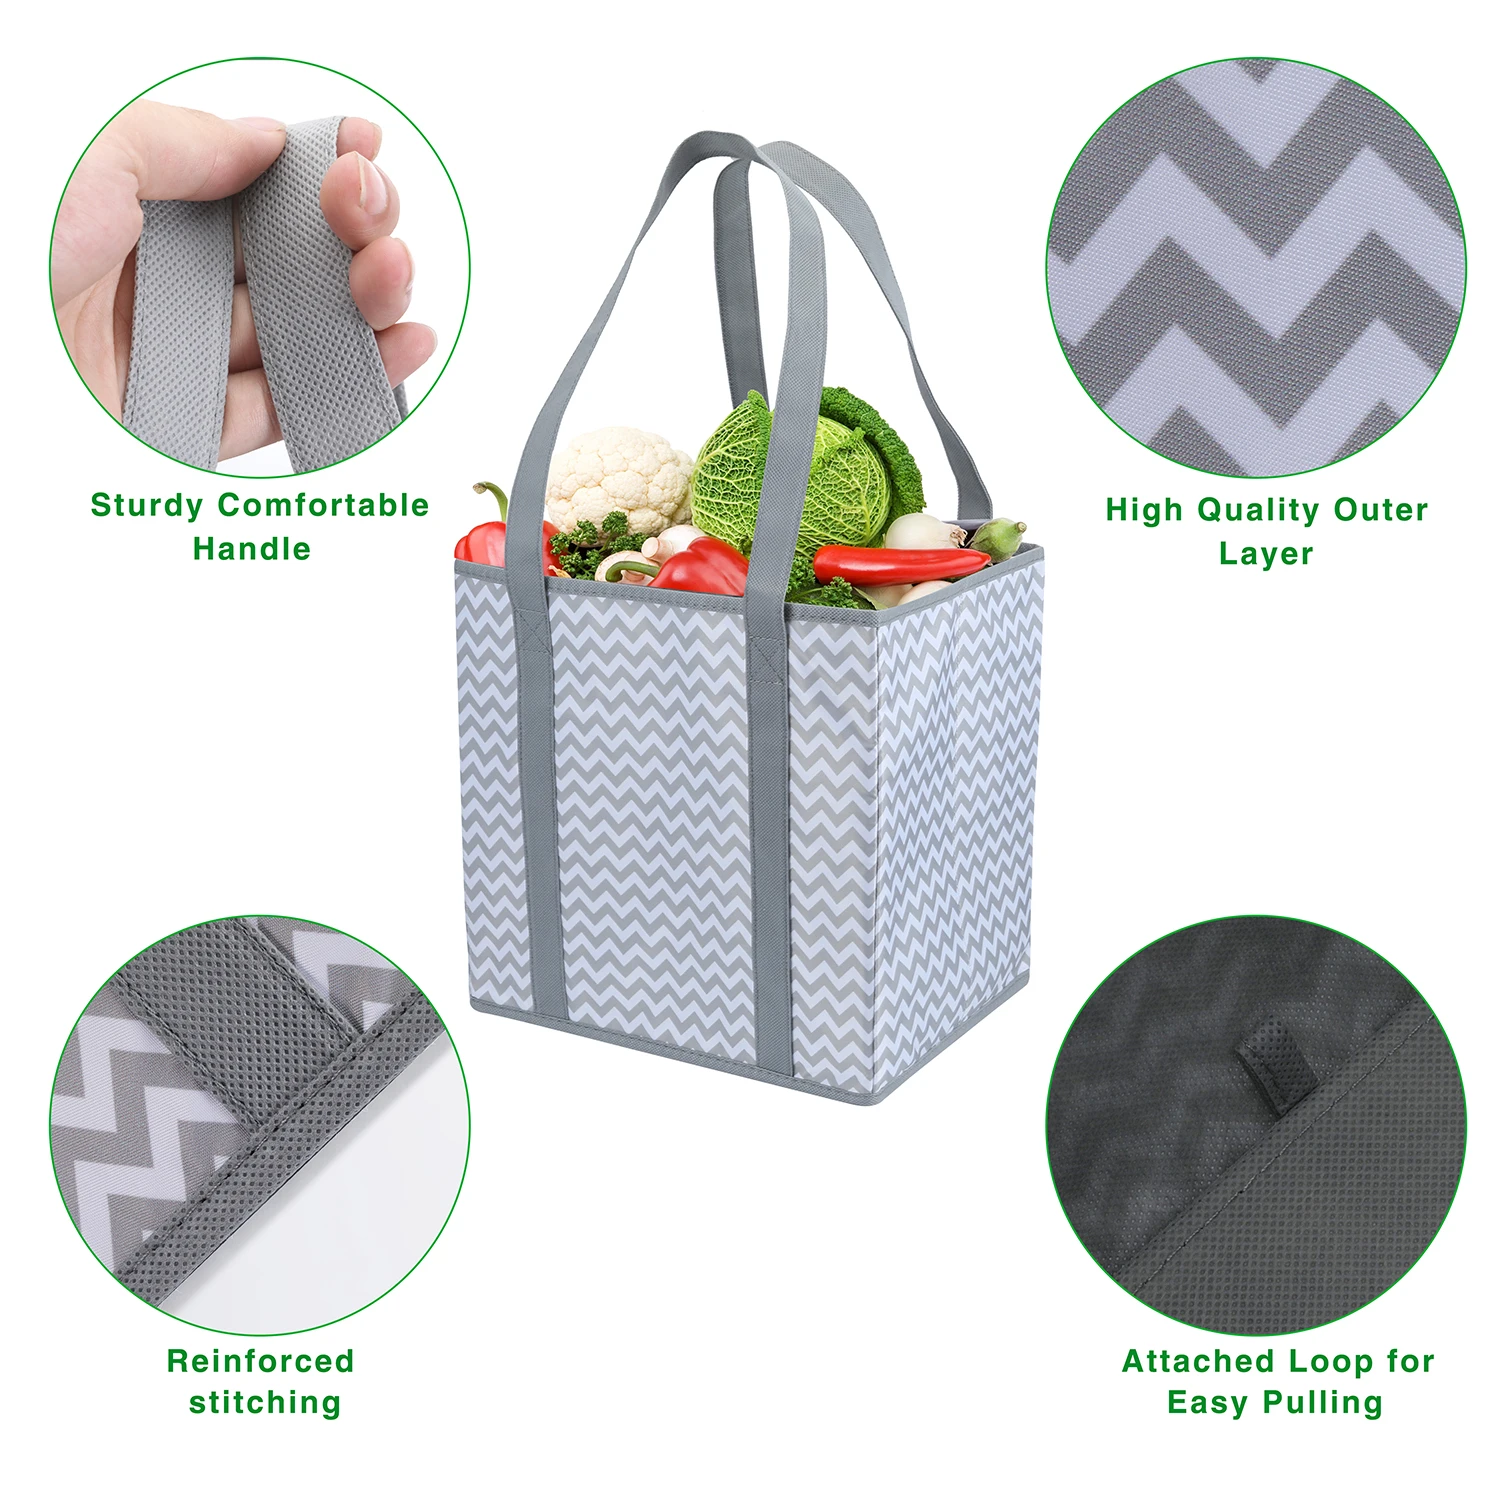 Large eco reusable laminated tote shopping bag with zipper closure